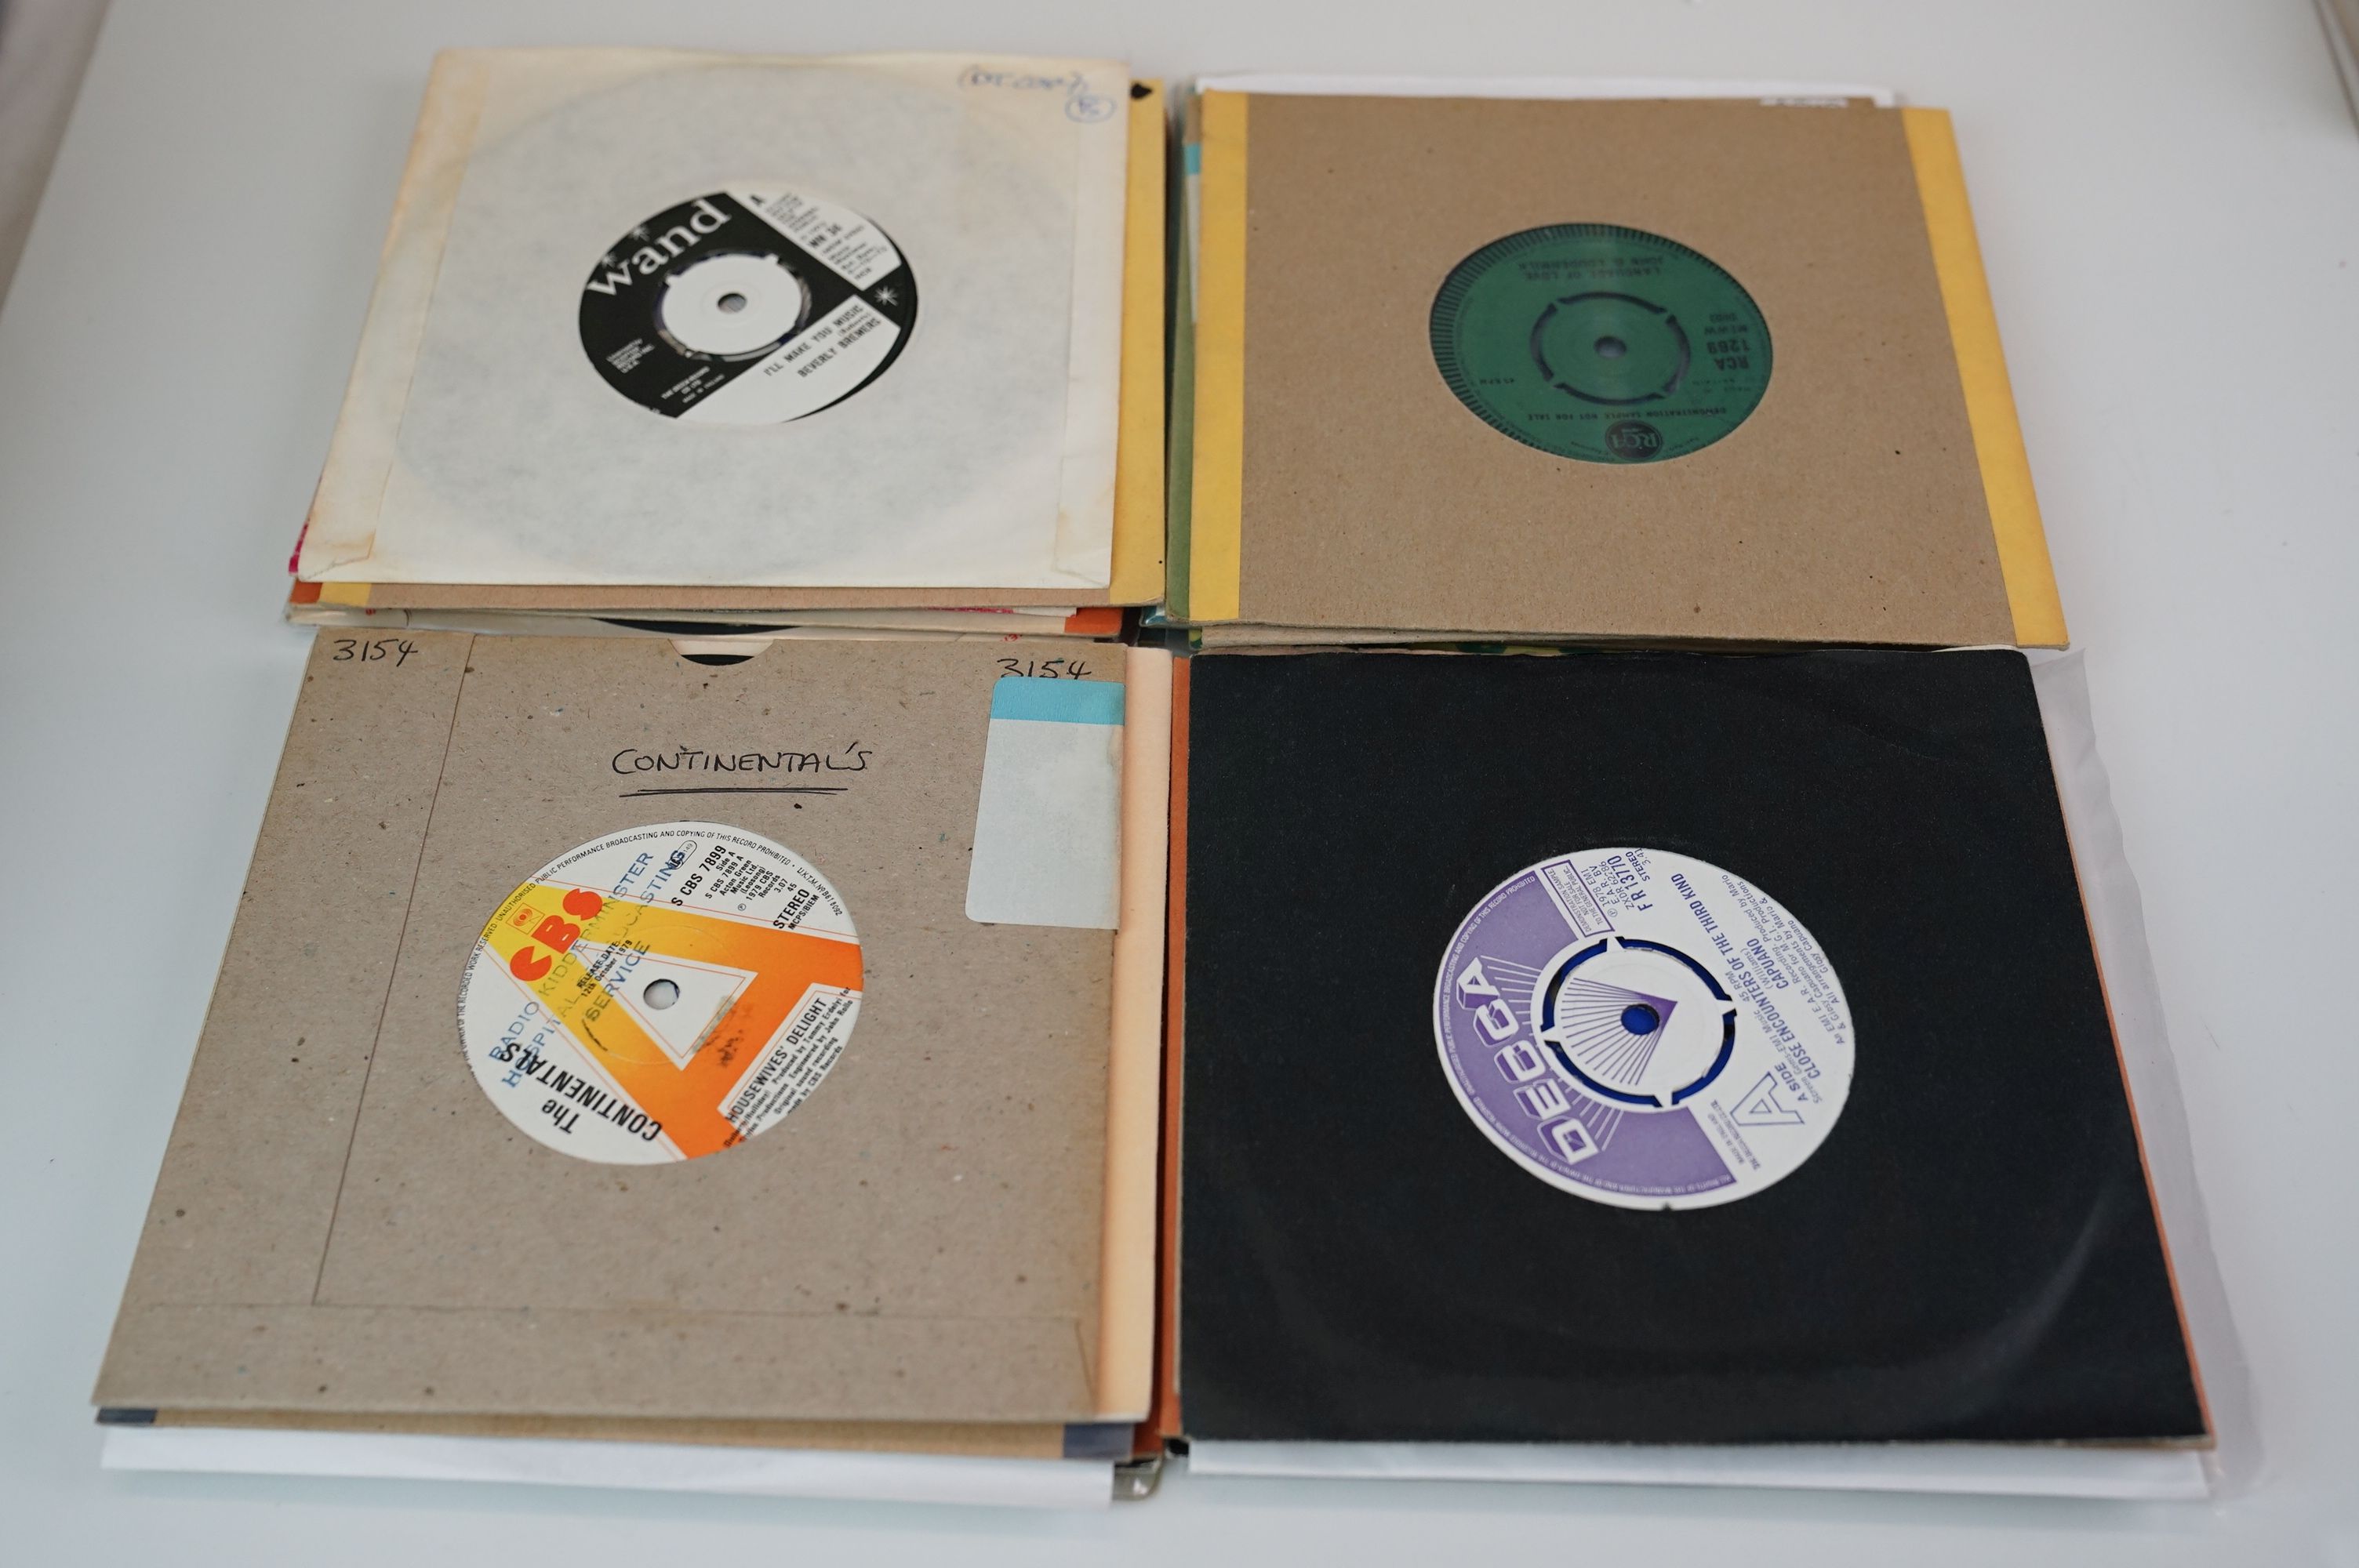 Vinyl - Collection of over 60 Demo & Promo 45s to include Gerry and the Pacemakers, Lisa Stansfield, - Image 9 of 18